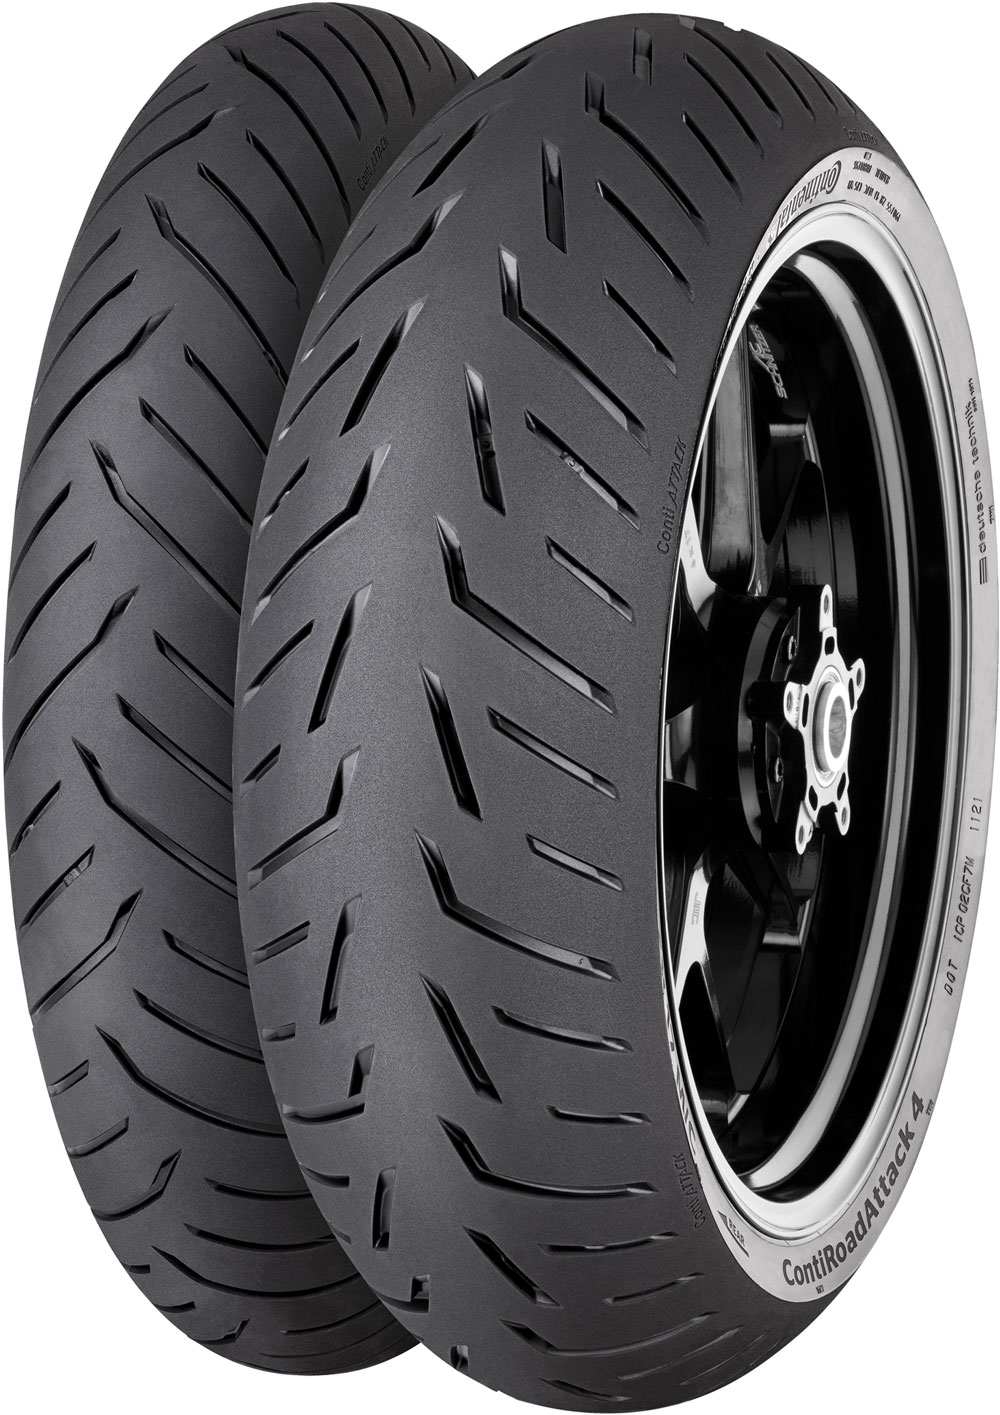 product_type-moto_tires CONTINENTAL RDATTACK4 190/55 R17 75W